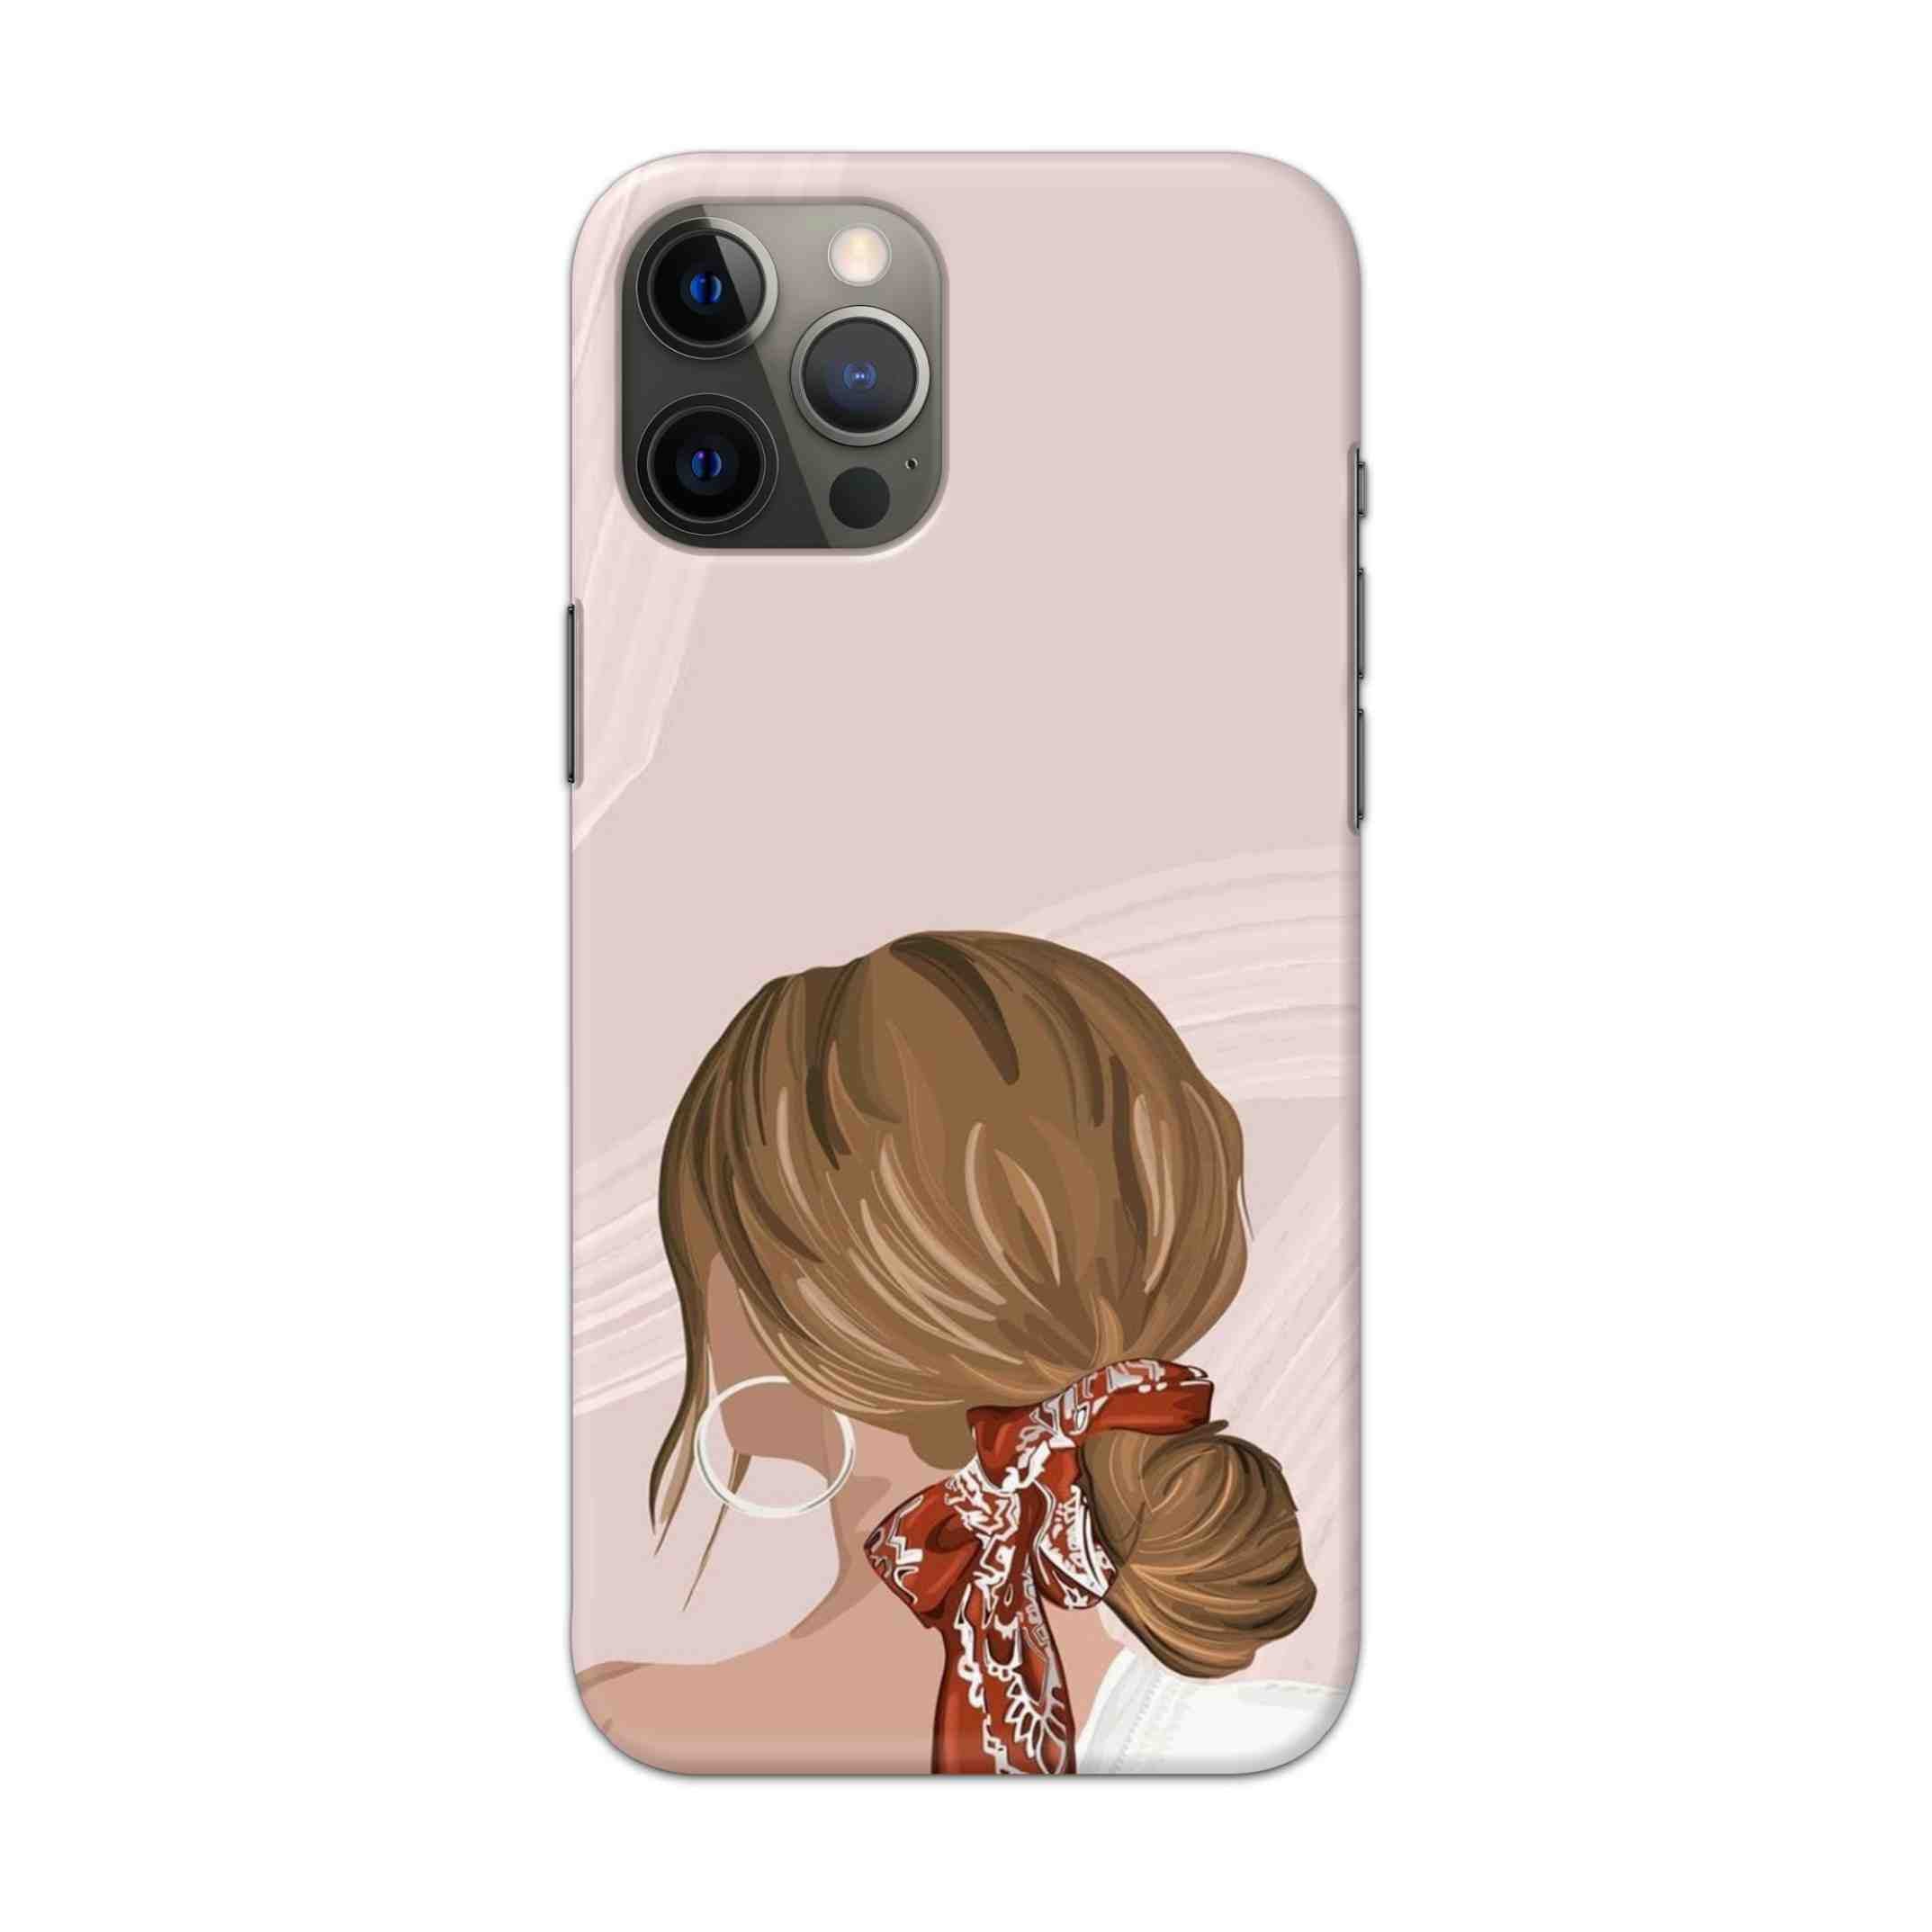 Buy Girl With Red Scaff Hard Back Mobile Phone Case Cover For Apple iPhone 13 Pro Online